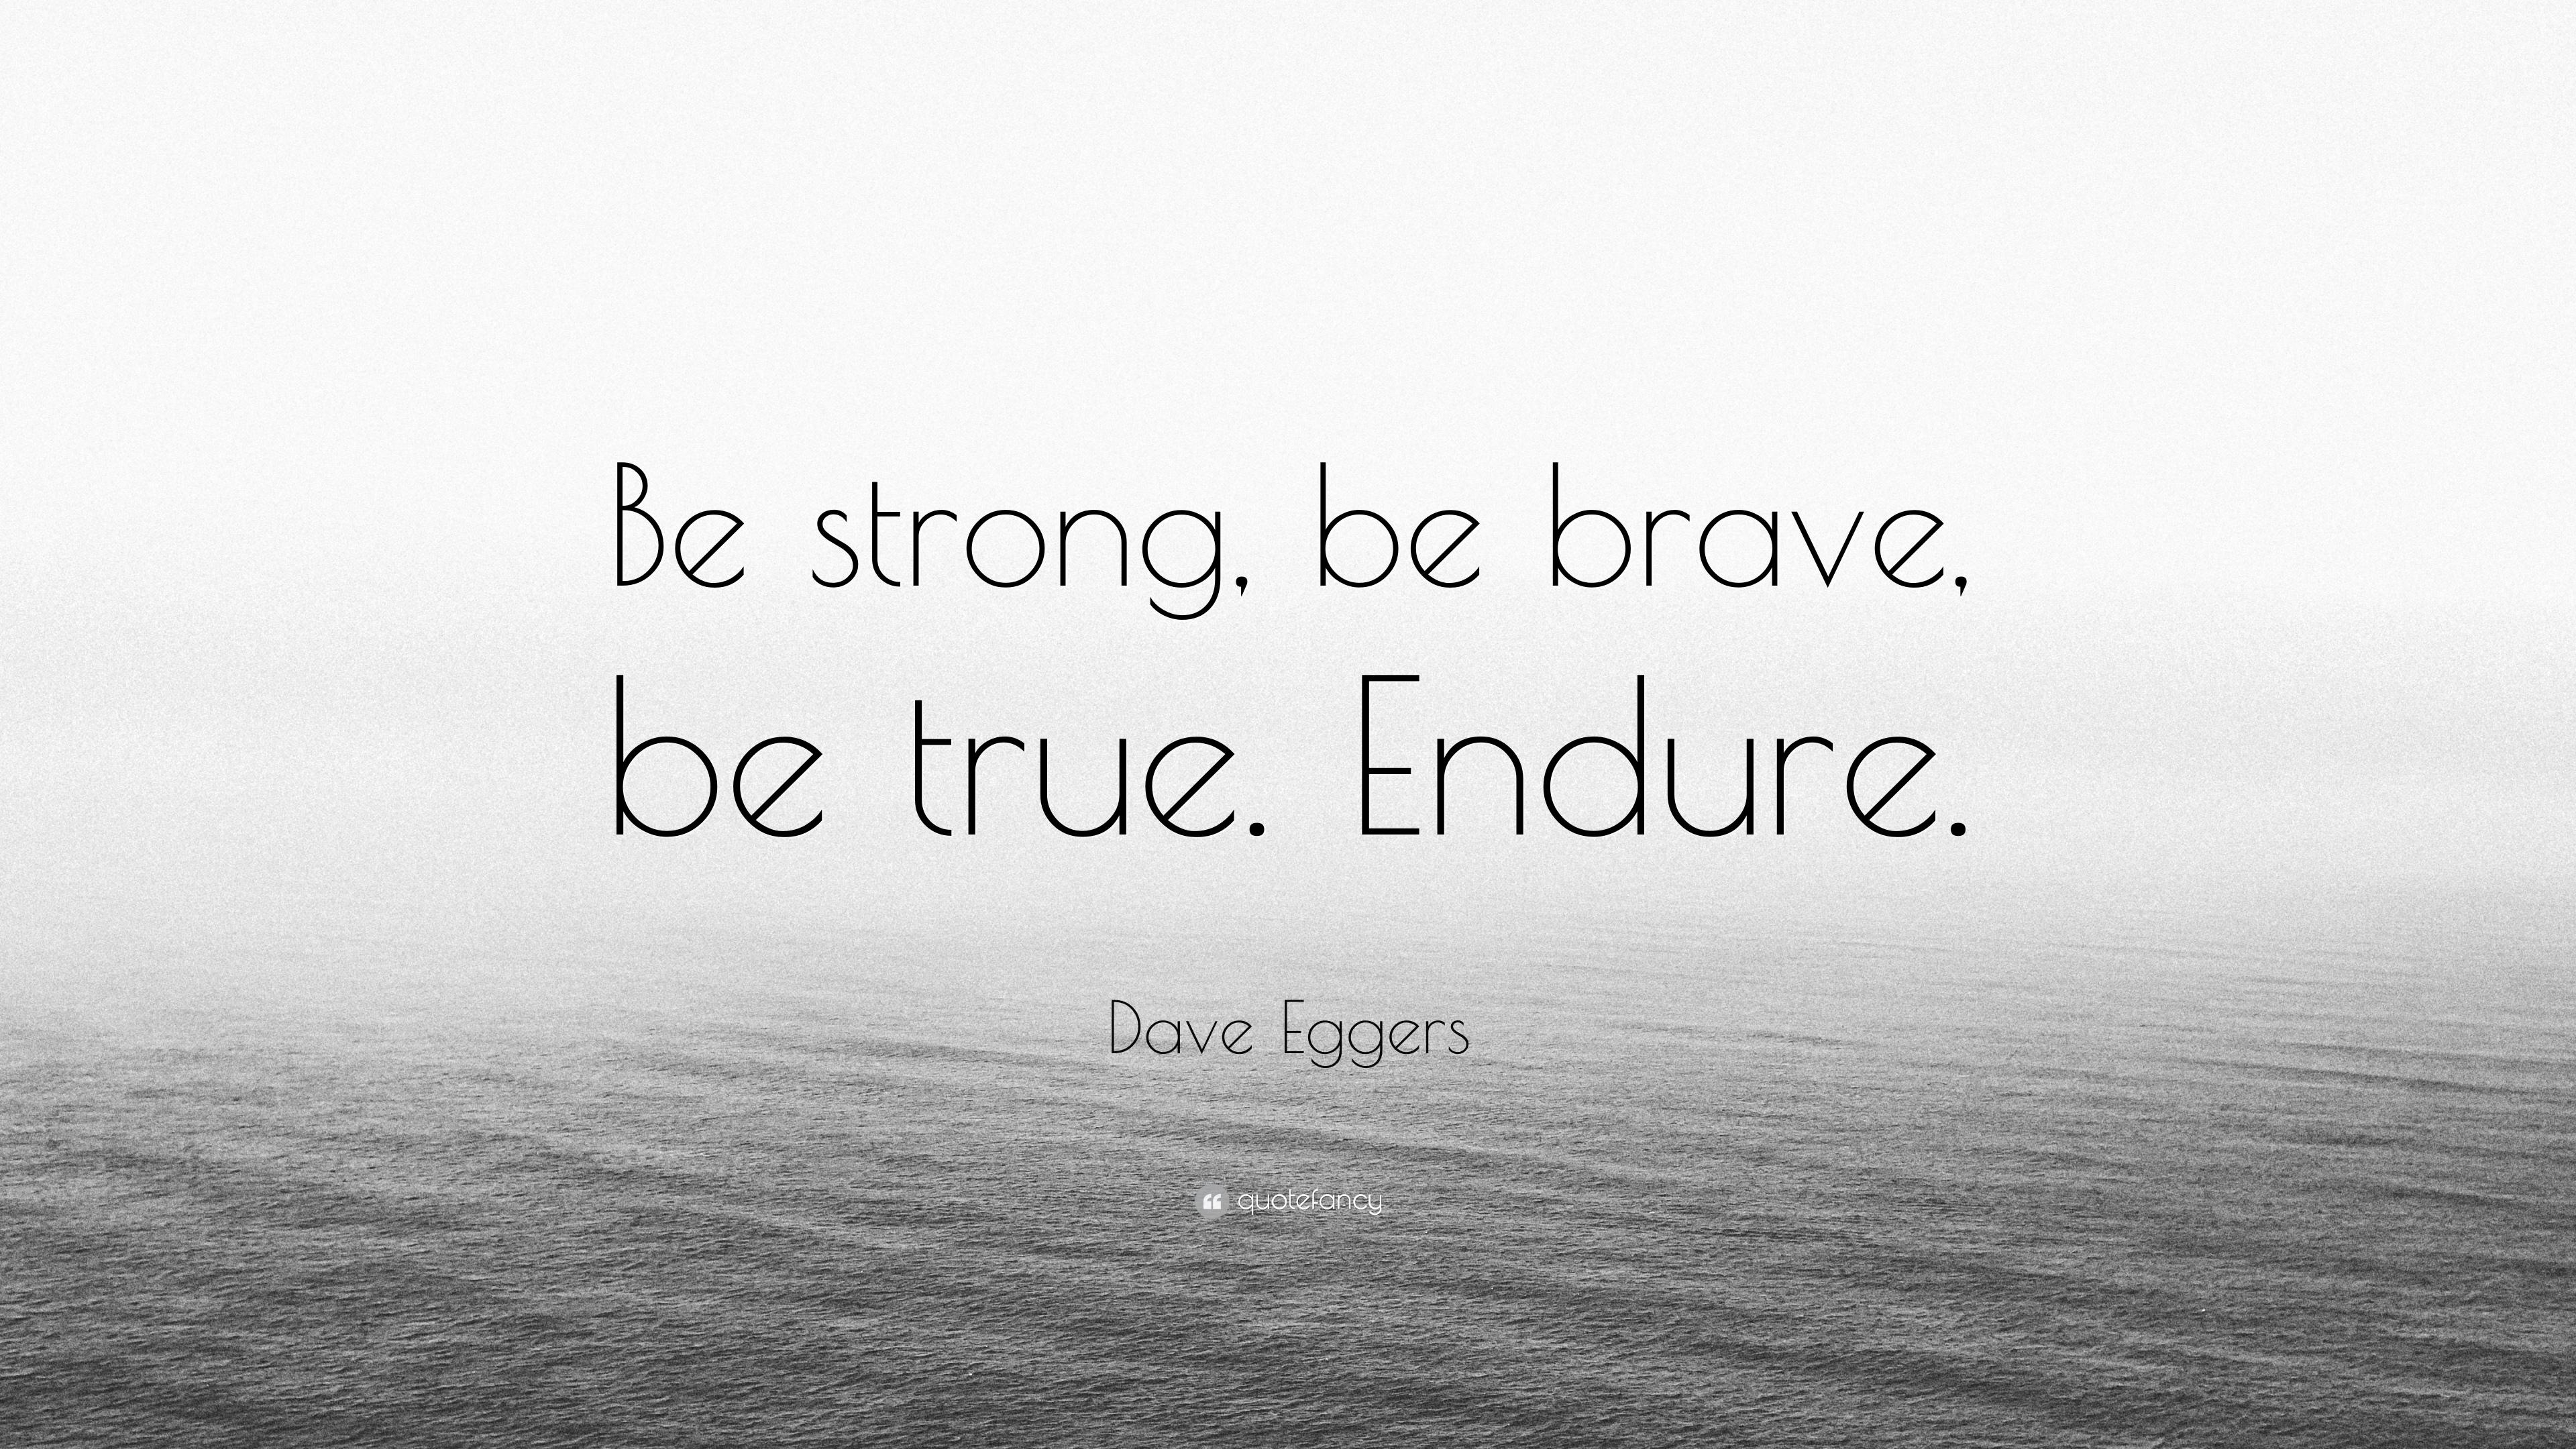 Dave Eggers Quote: “Be strong, be brave, be true. Endure.” 6